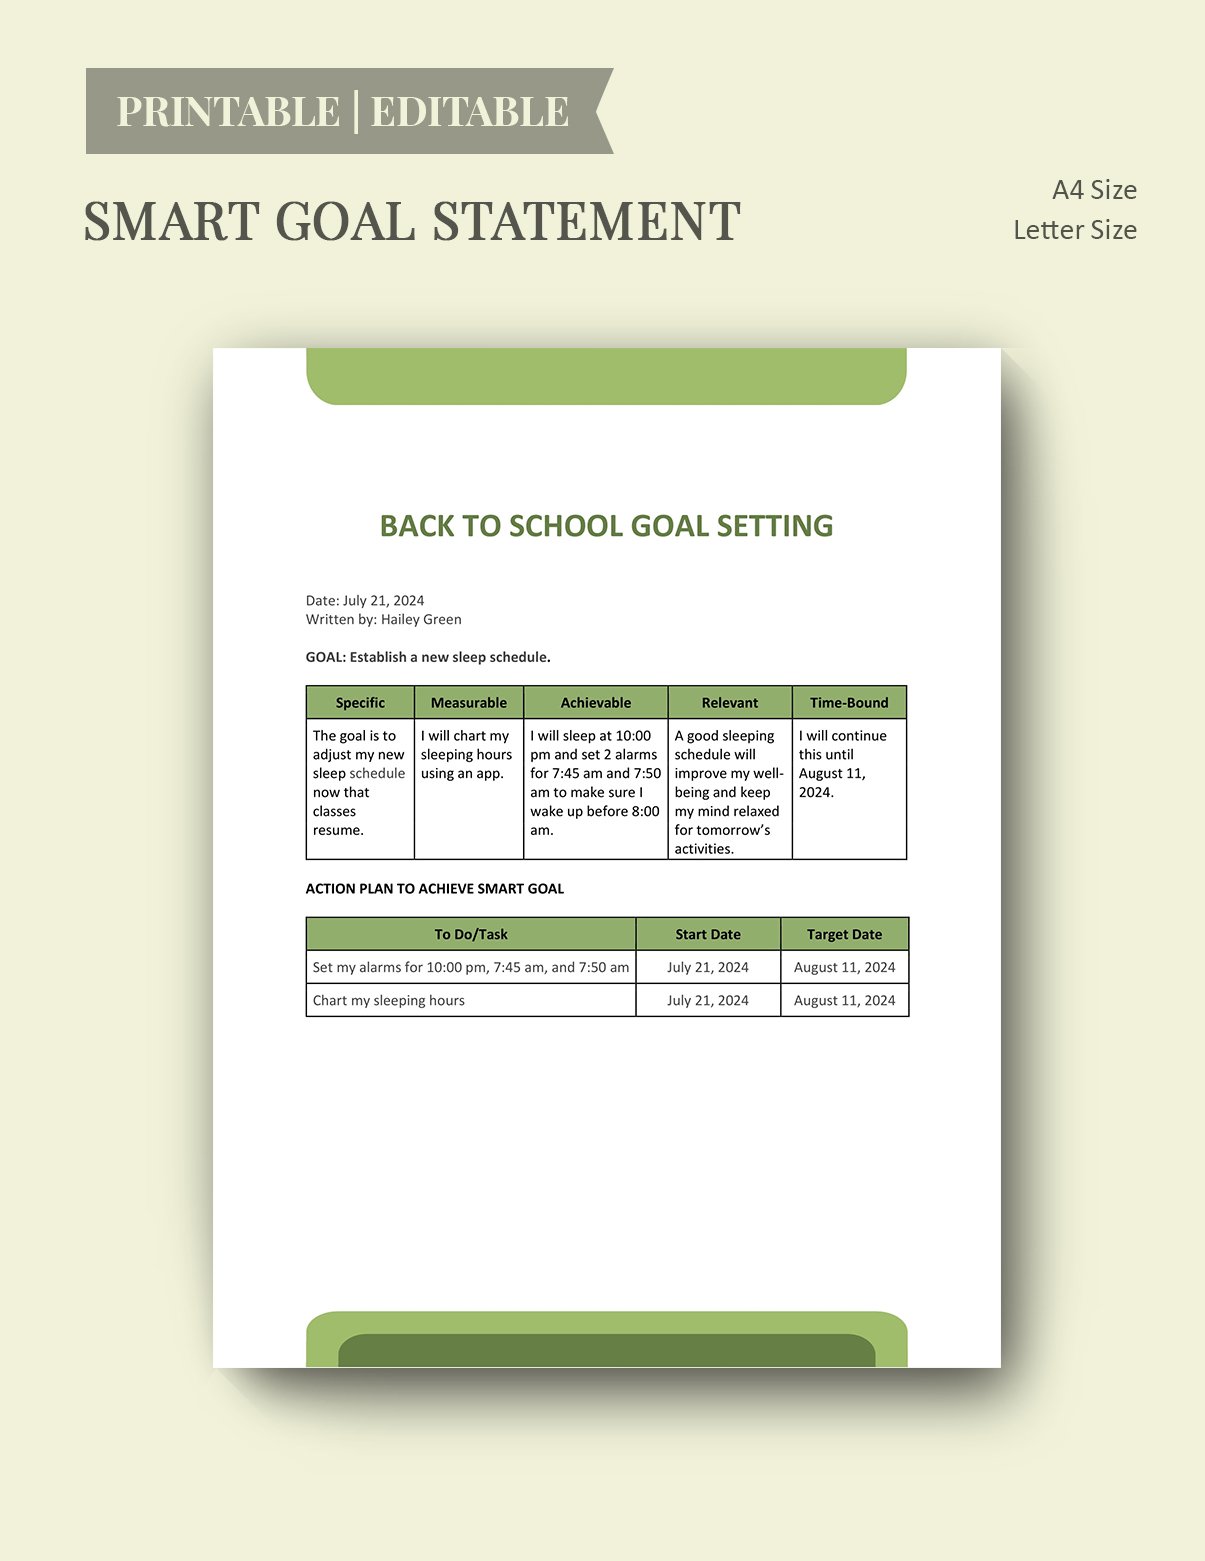 Back to School Goal Setting Template